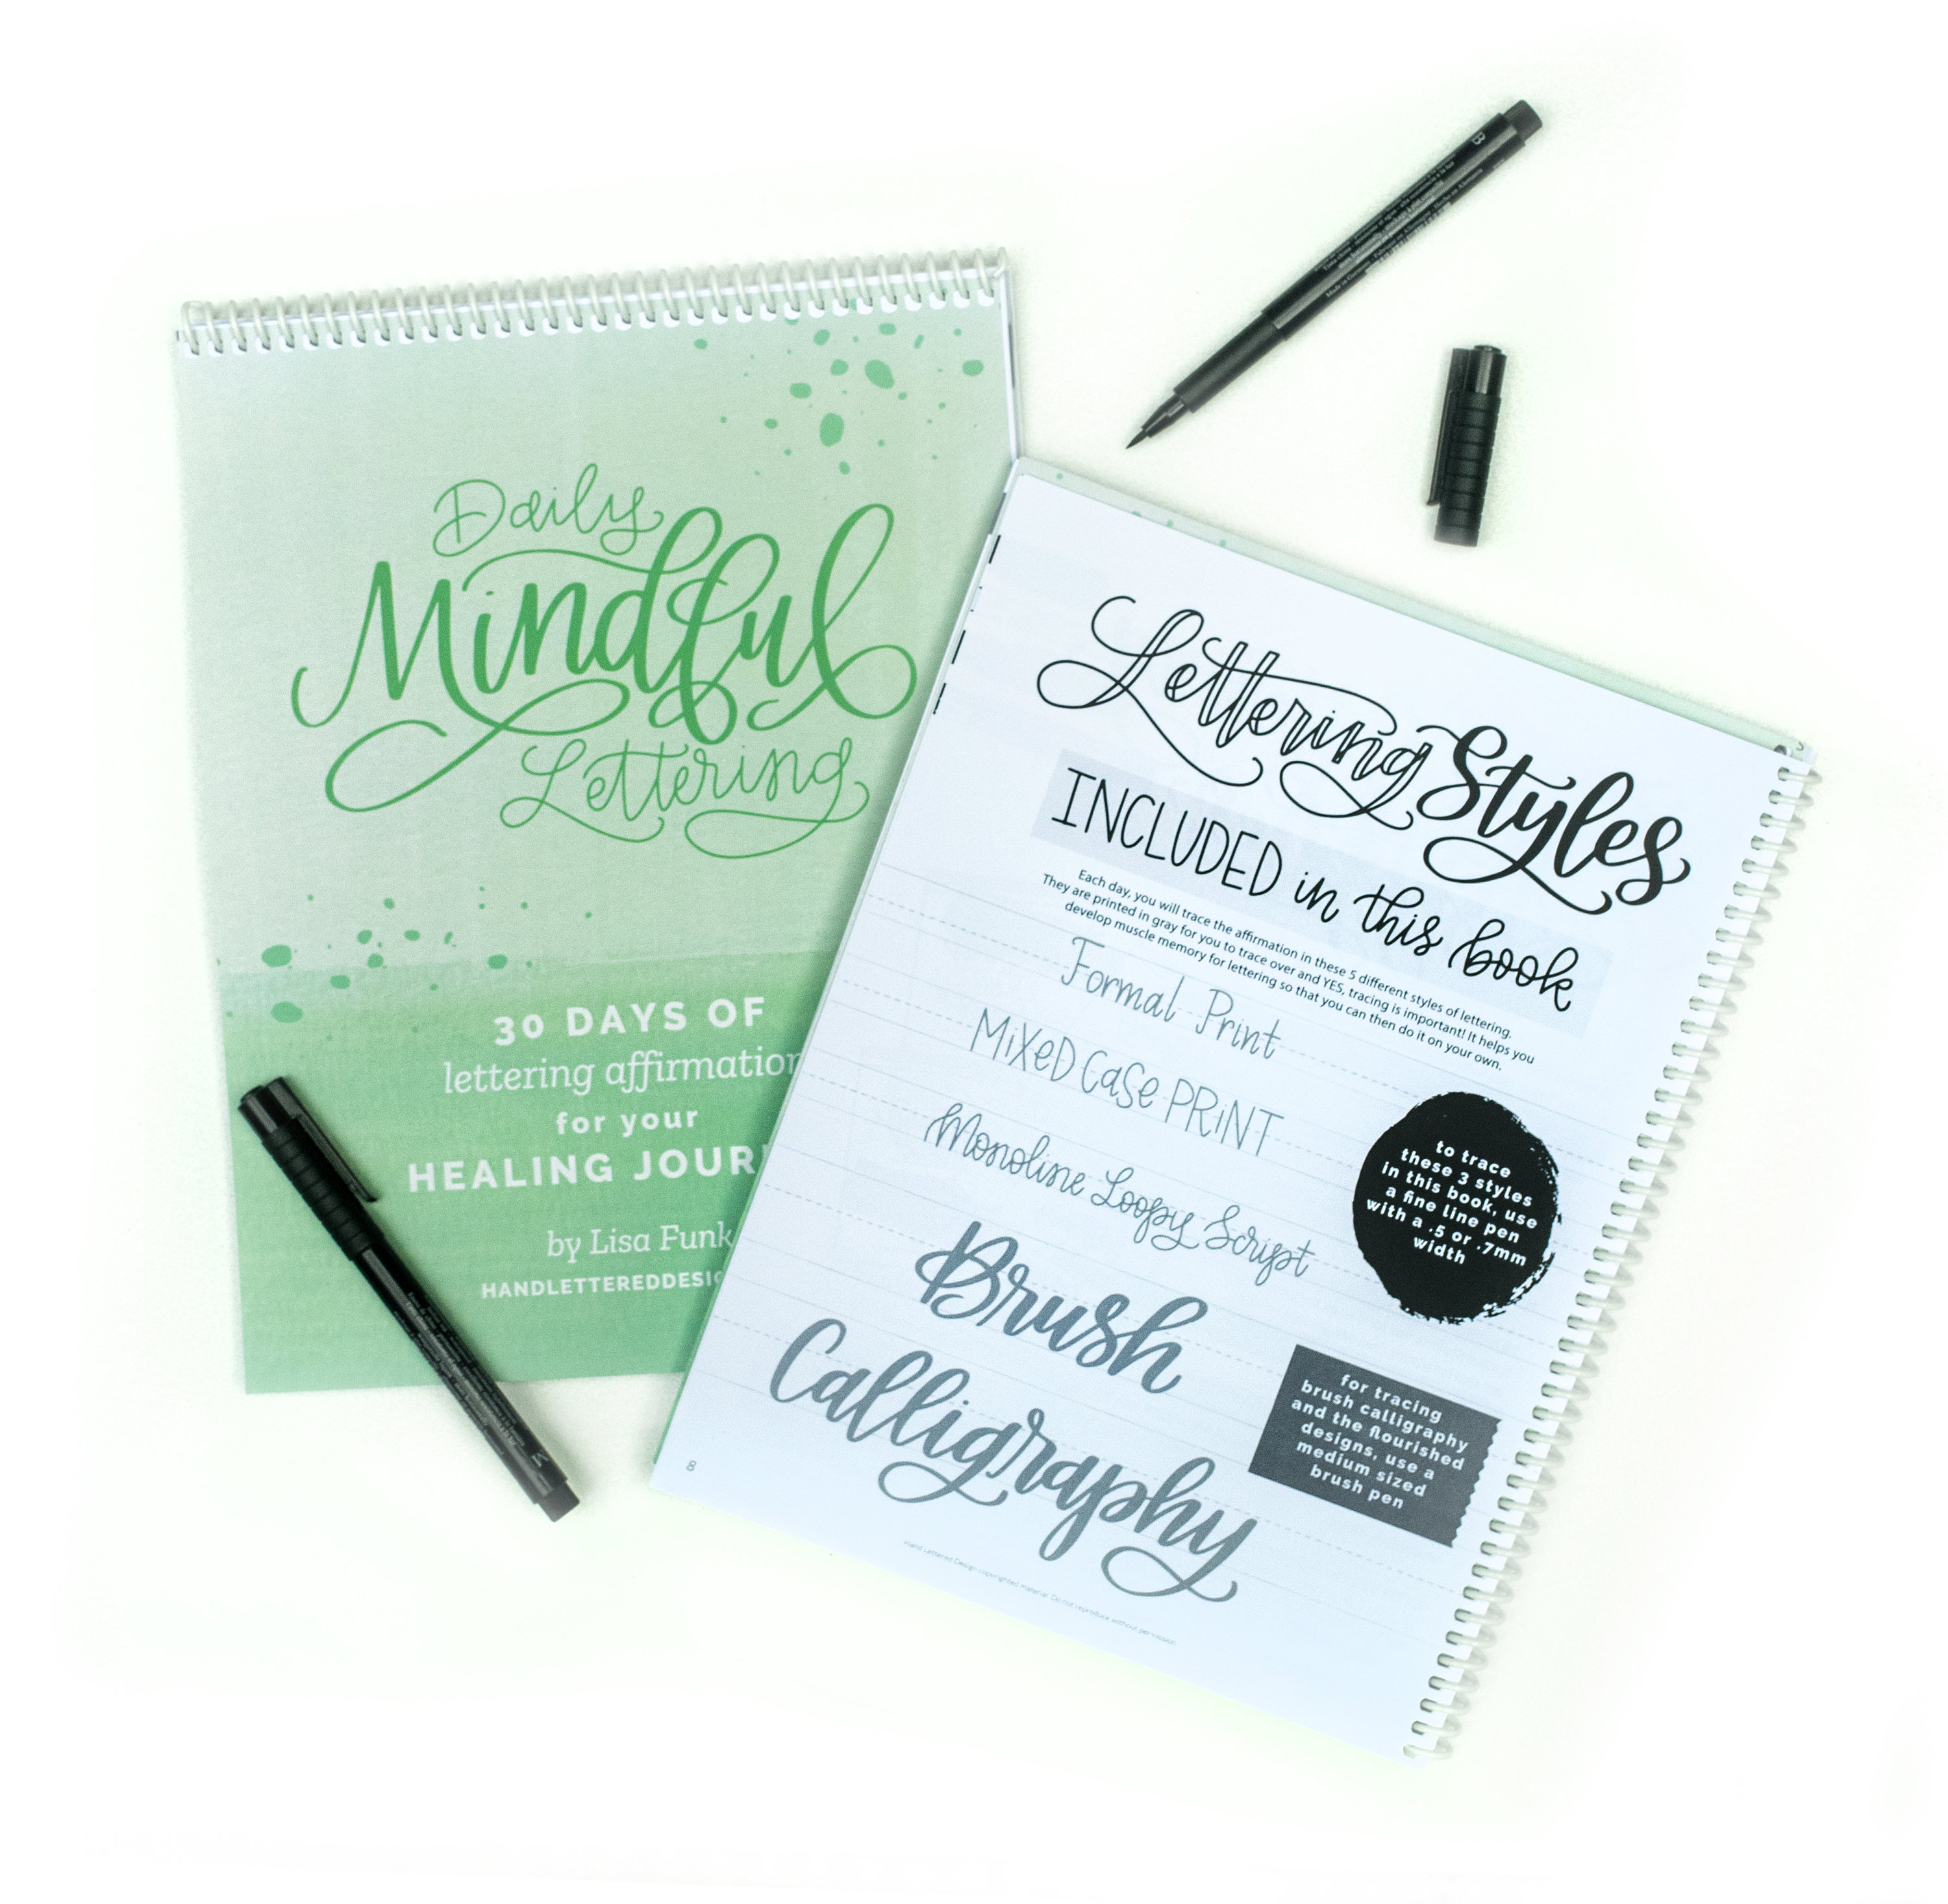 Daily Mindful Lettering Book 3: 30 Days of Affirmations for Your Healing  Journey 